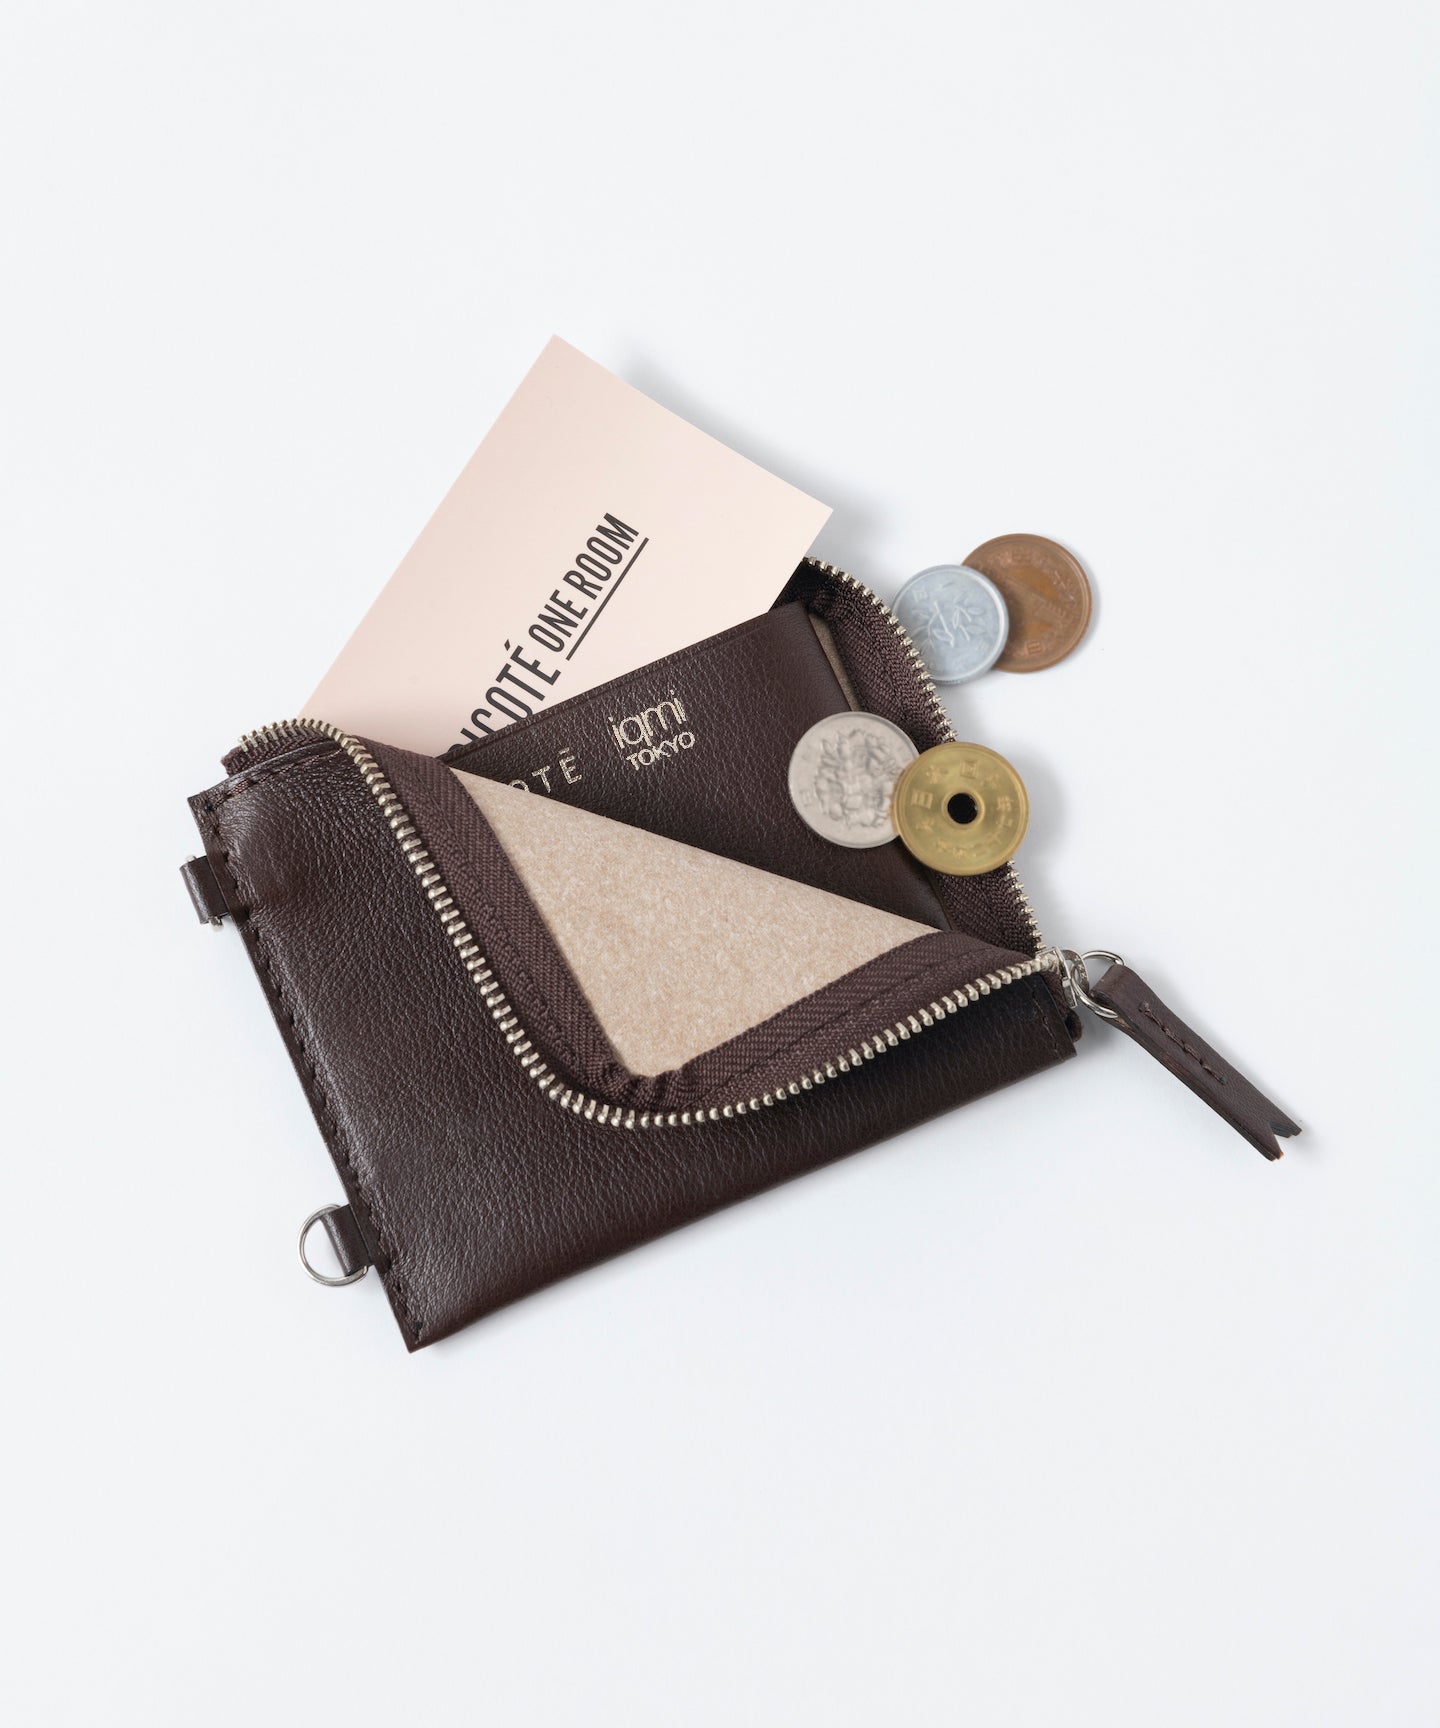 LEATHER  WALLET